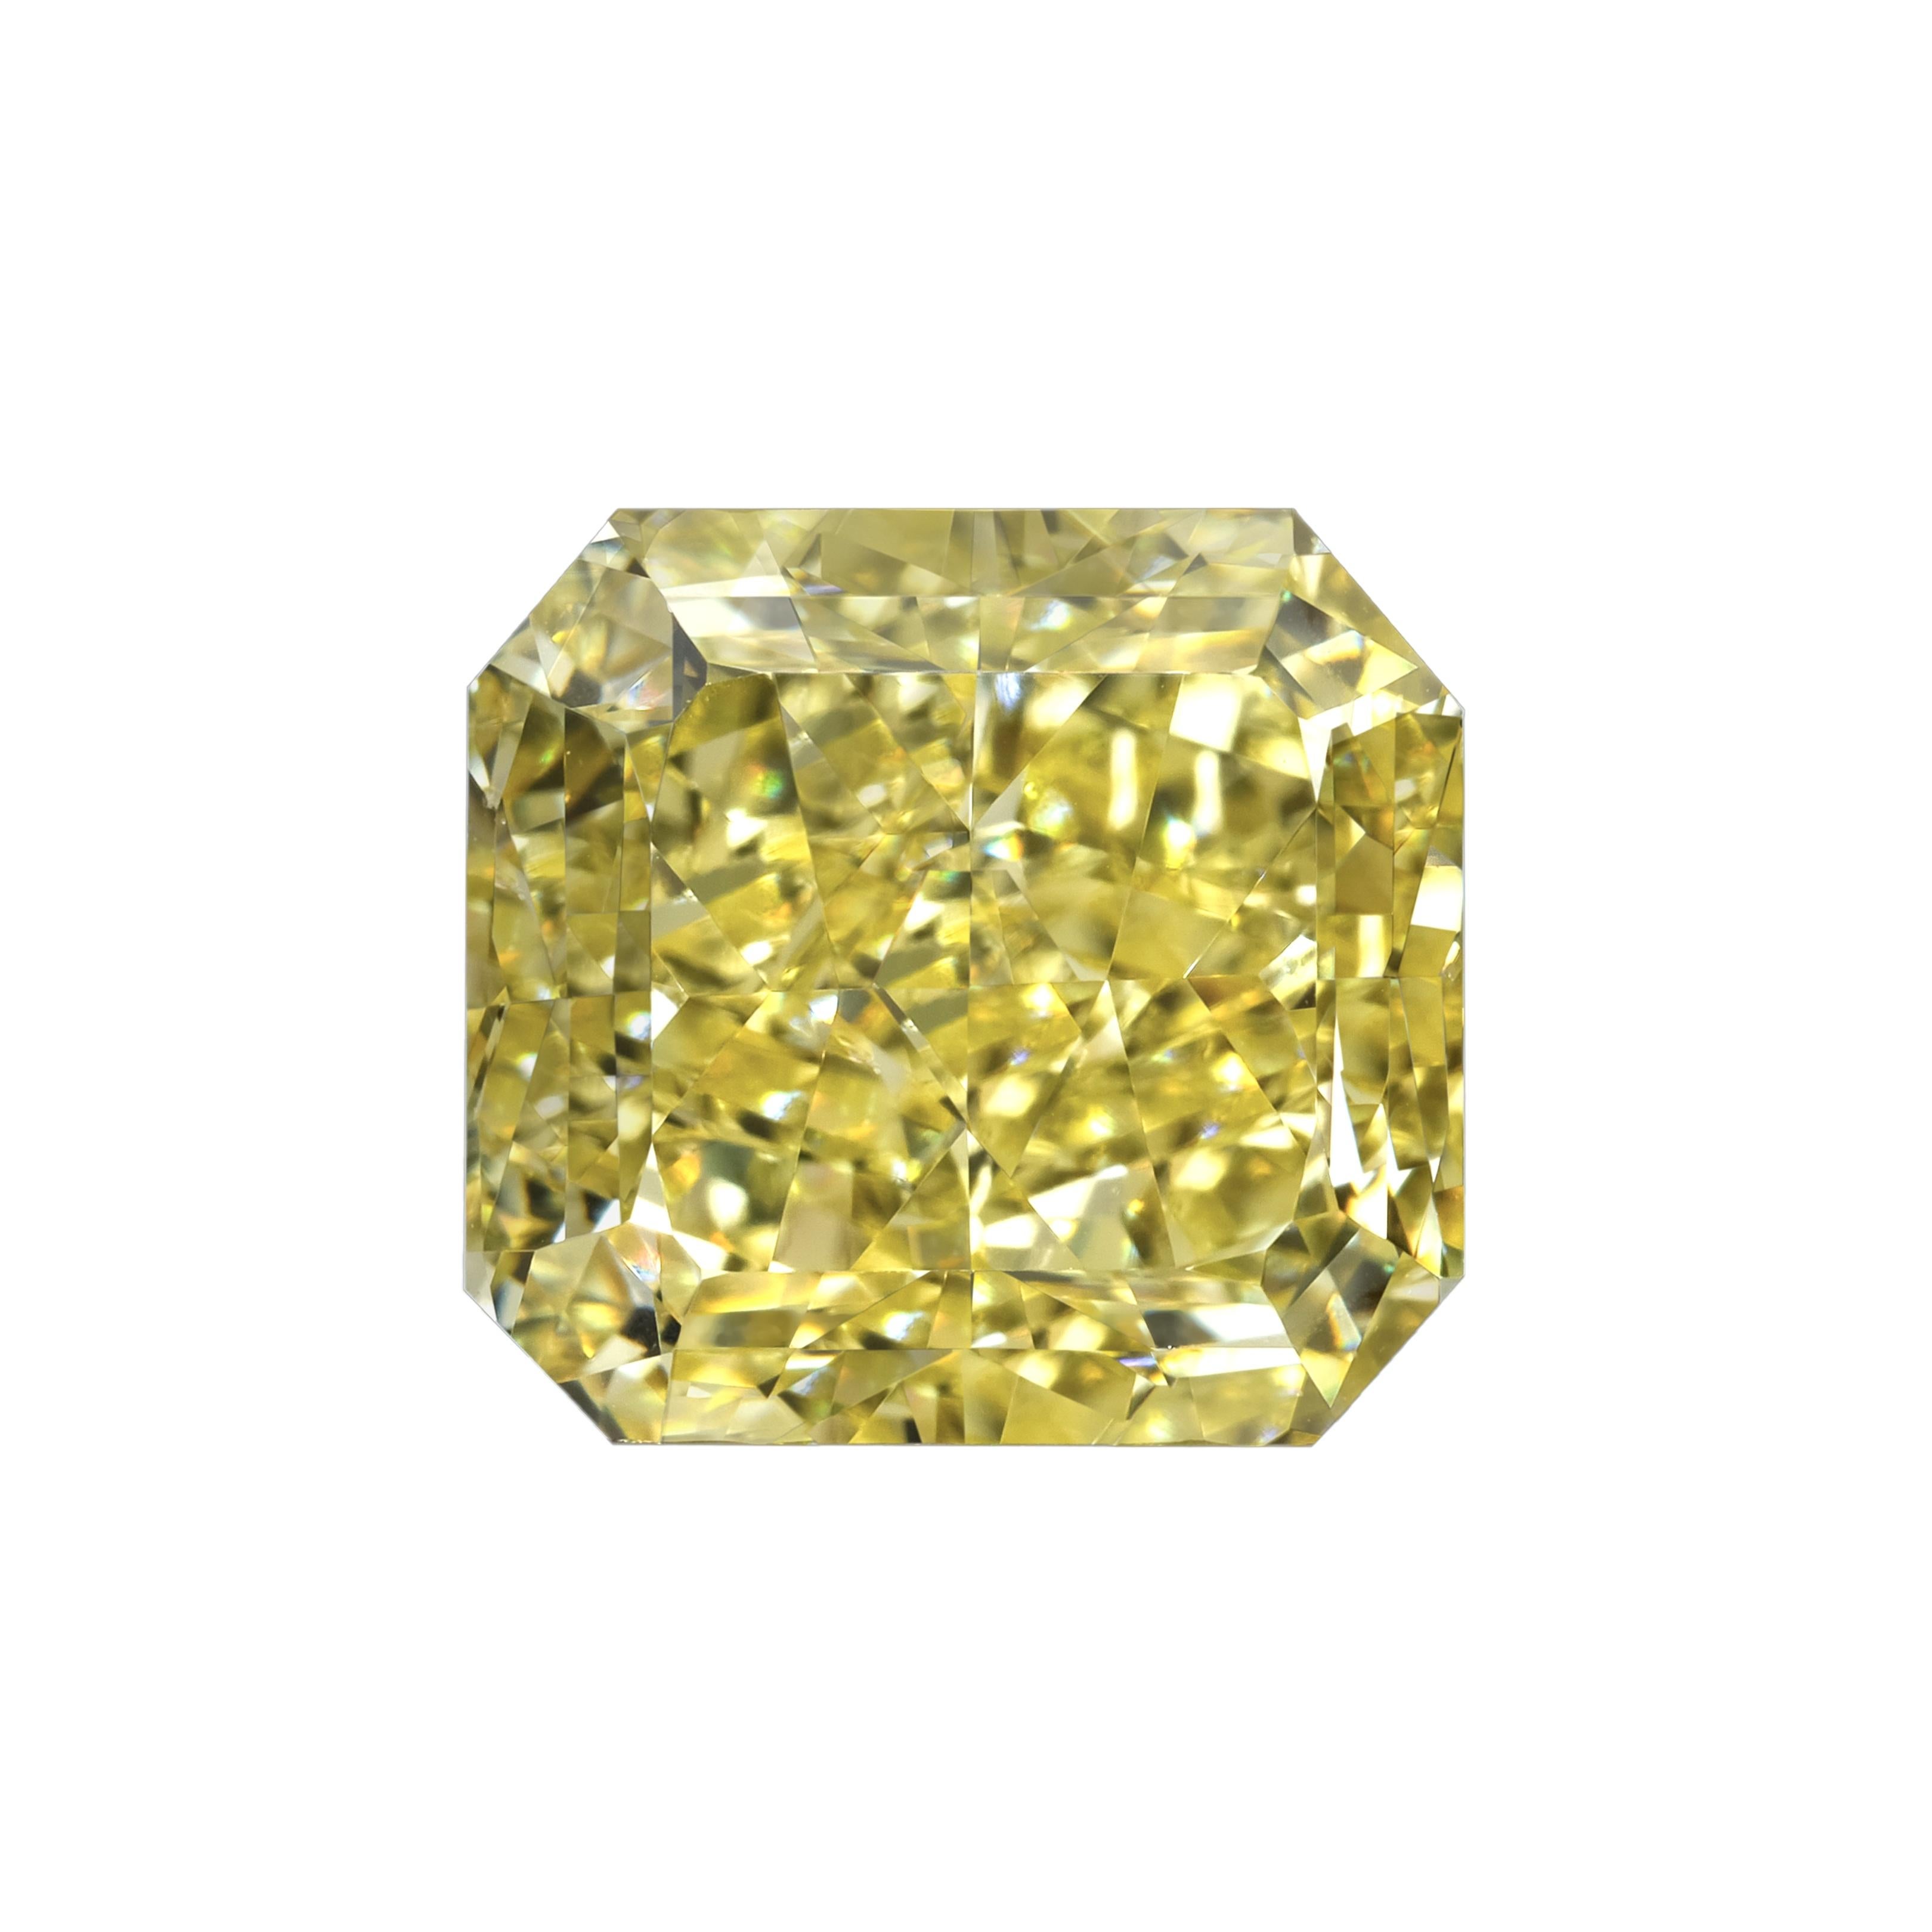 Women's or Men's GIA Certified 3.03 Carat Radiant Cut Yellow Diamond Ring For Sale